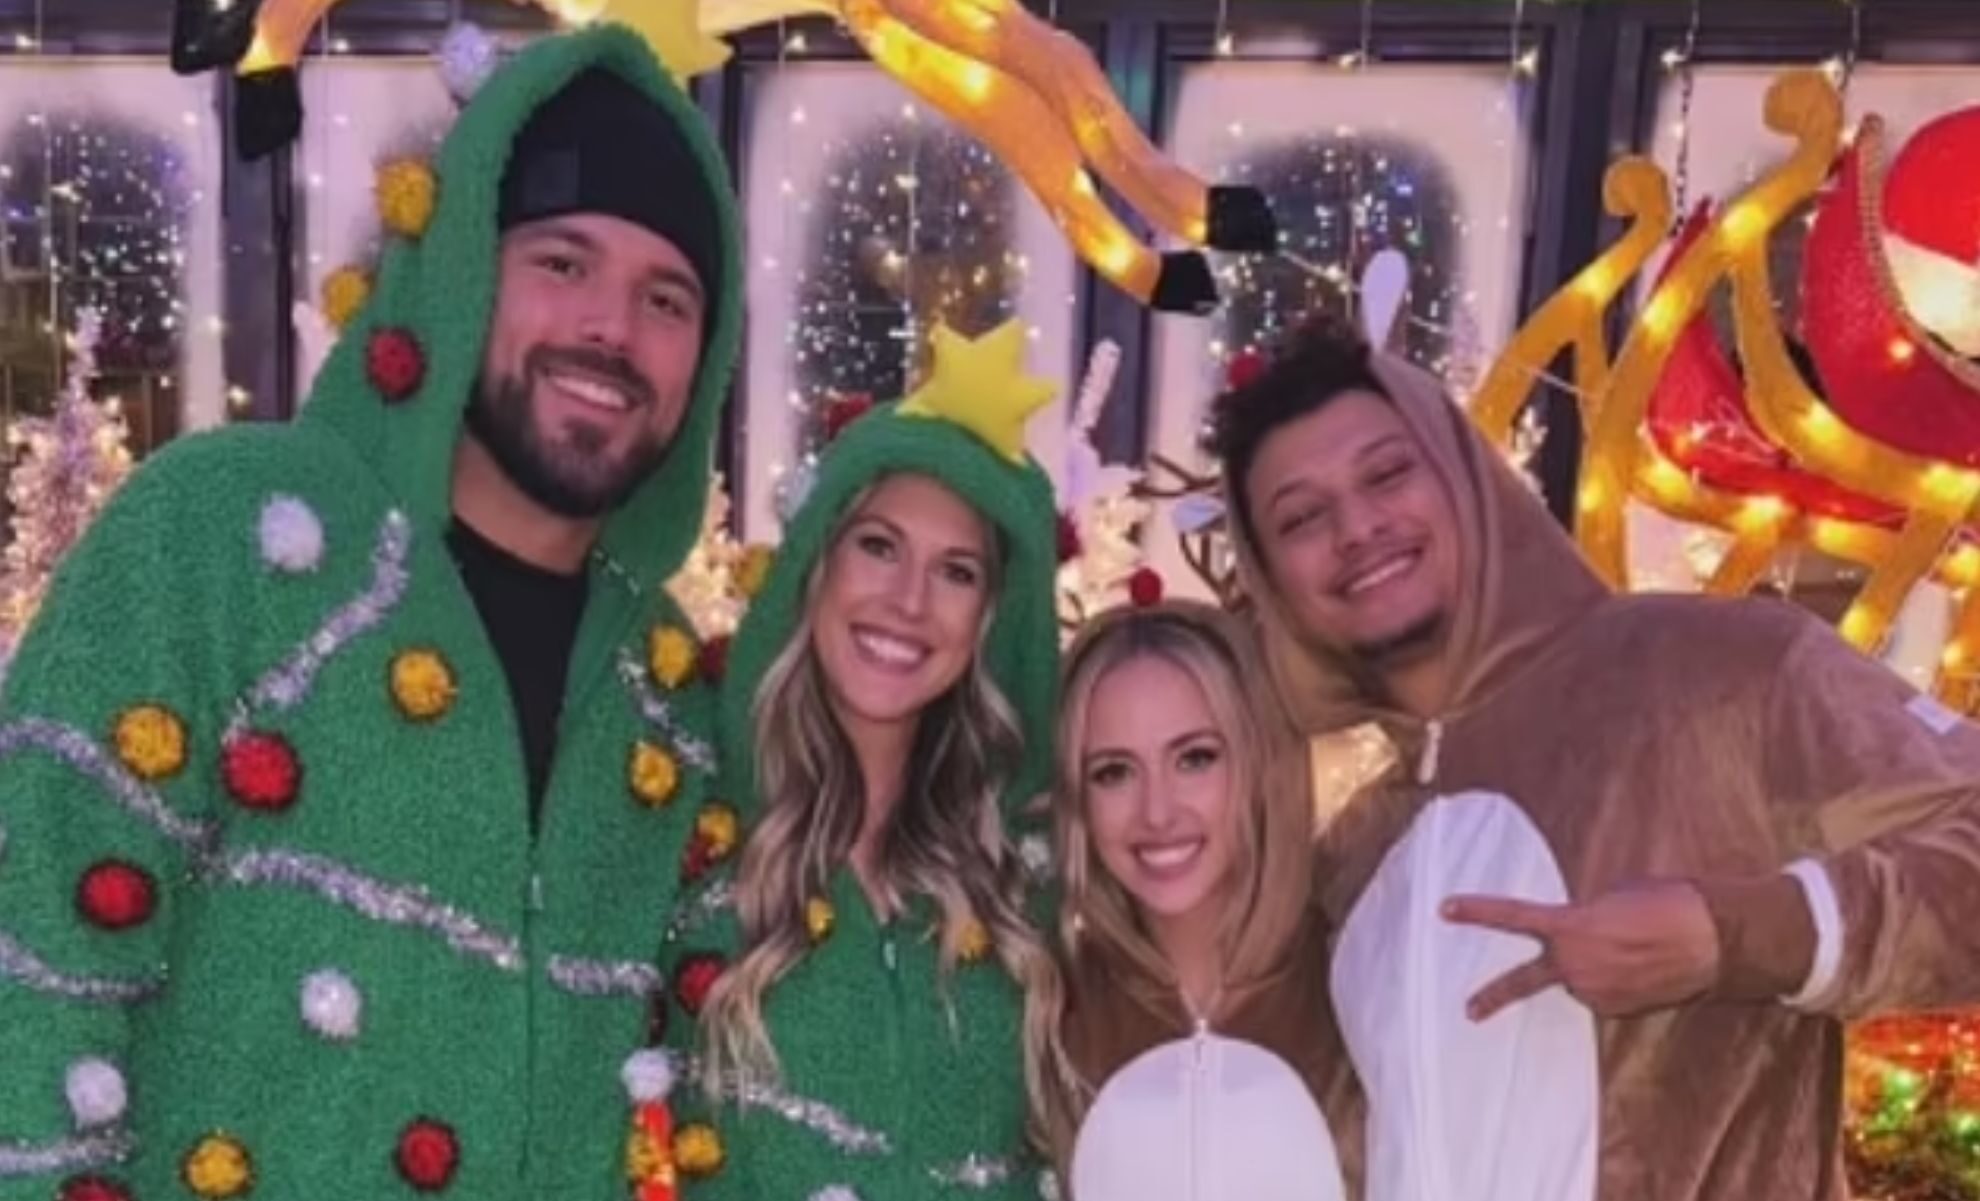 Christmas Comes Early for The Mahomes, who Trade 'Traylor' for New Couple